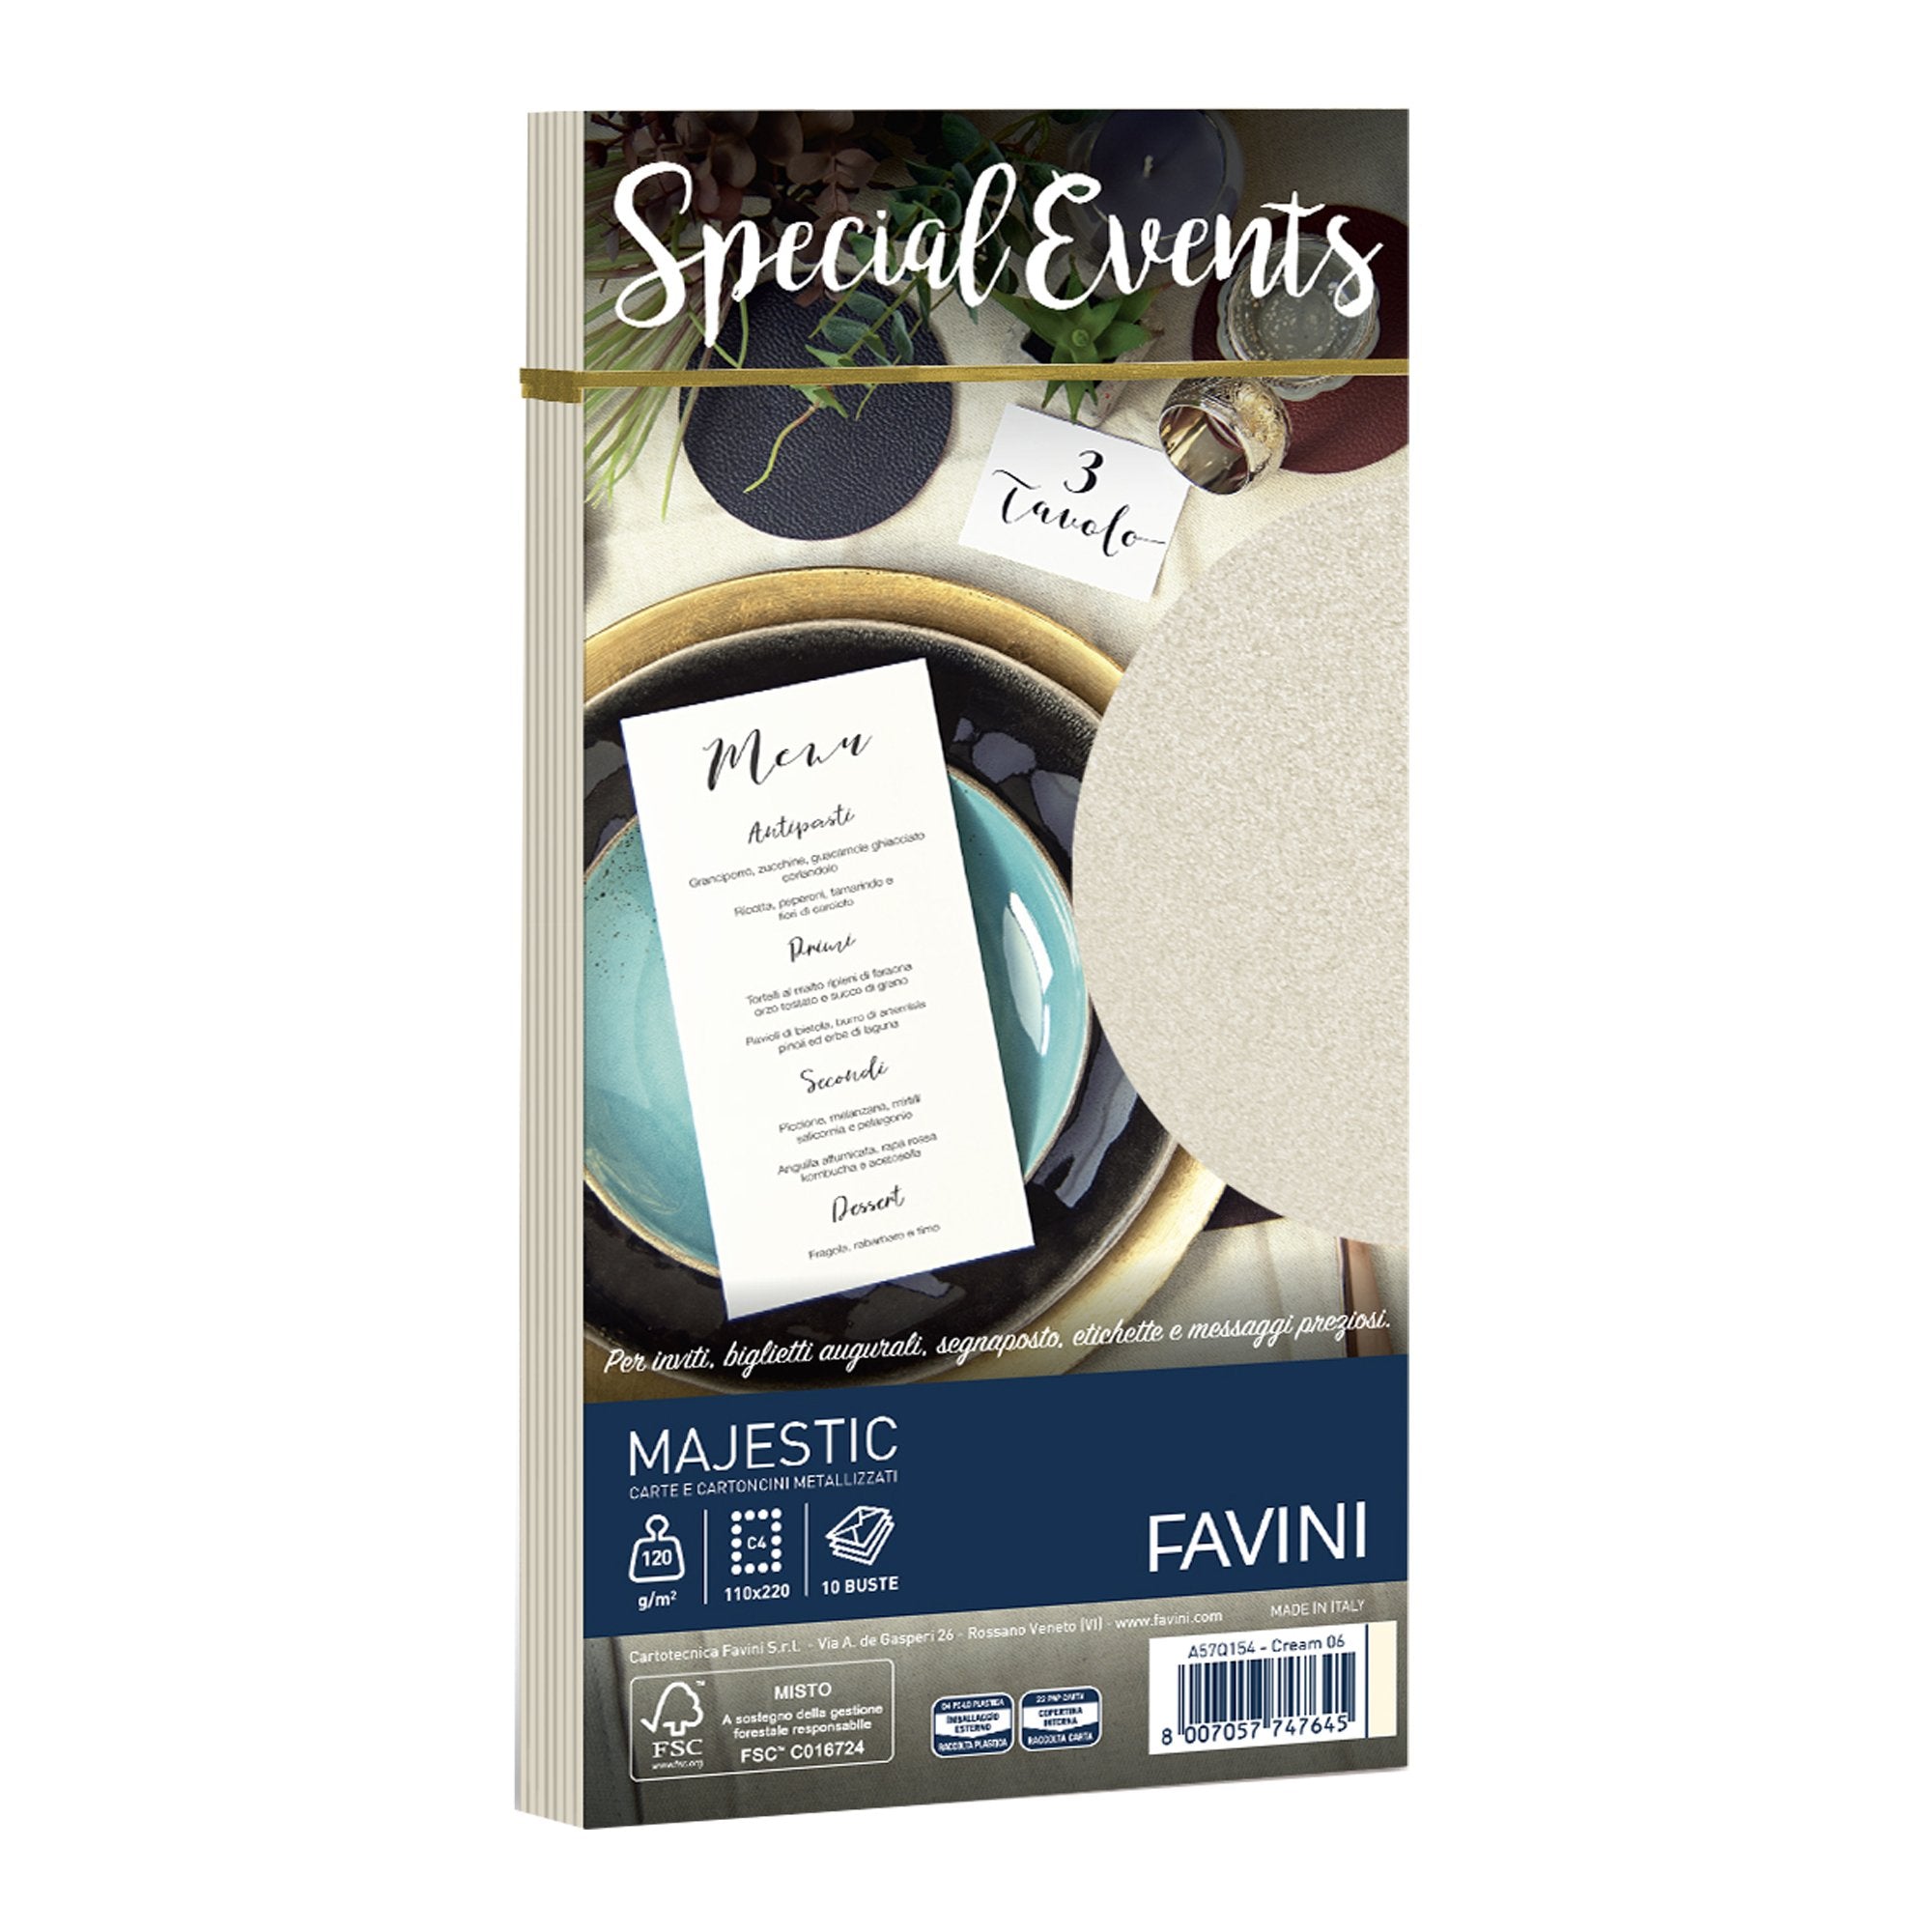 favini-10-buste-special-events-metal-120gr-110x220mm-crema